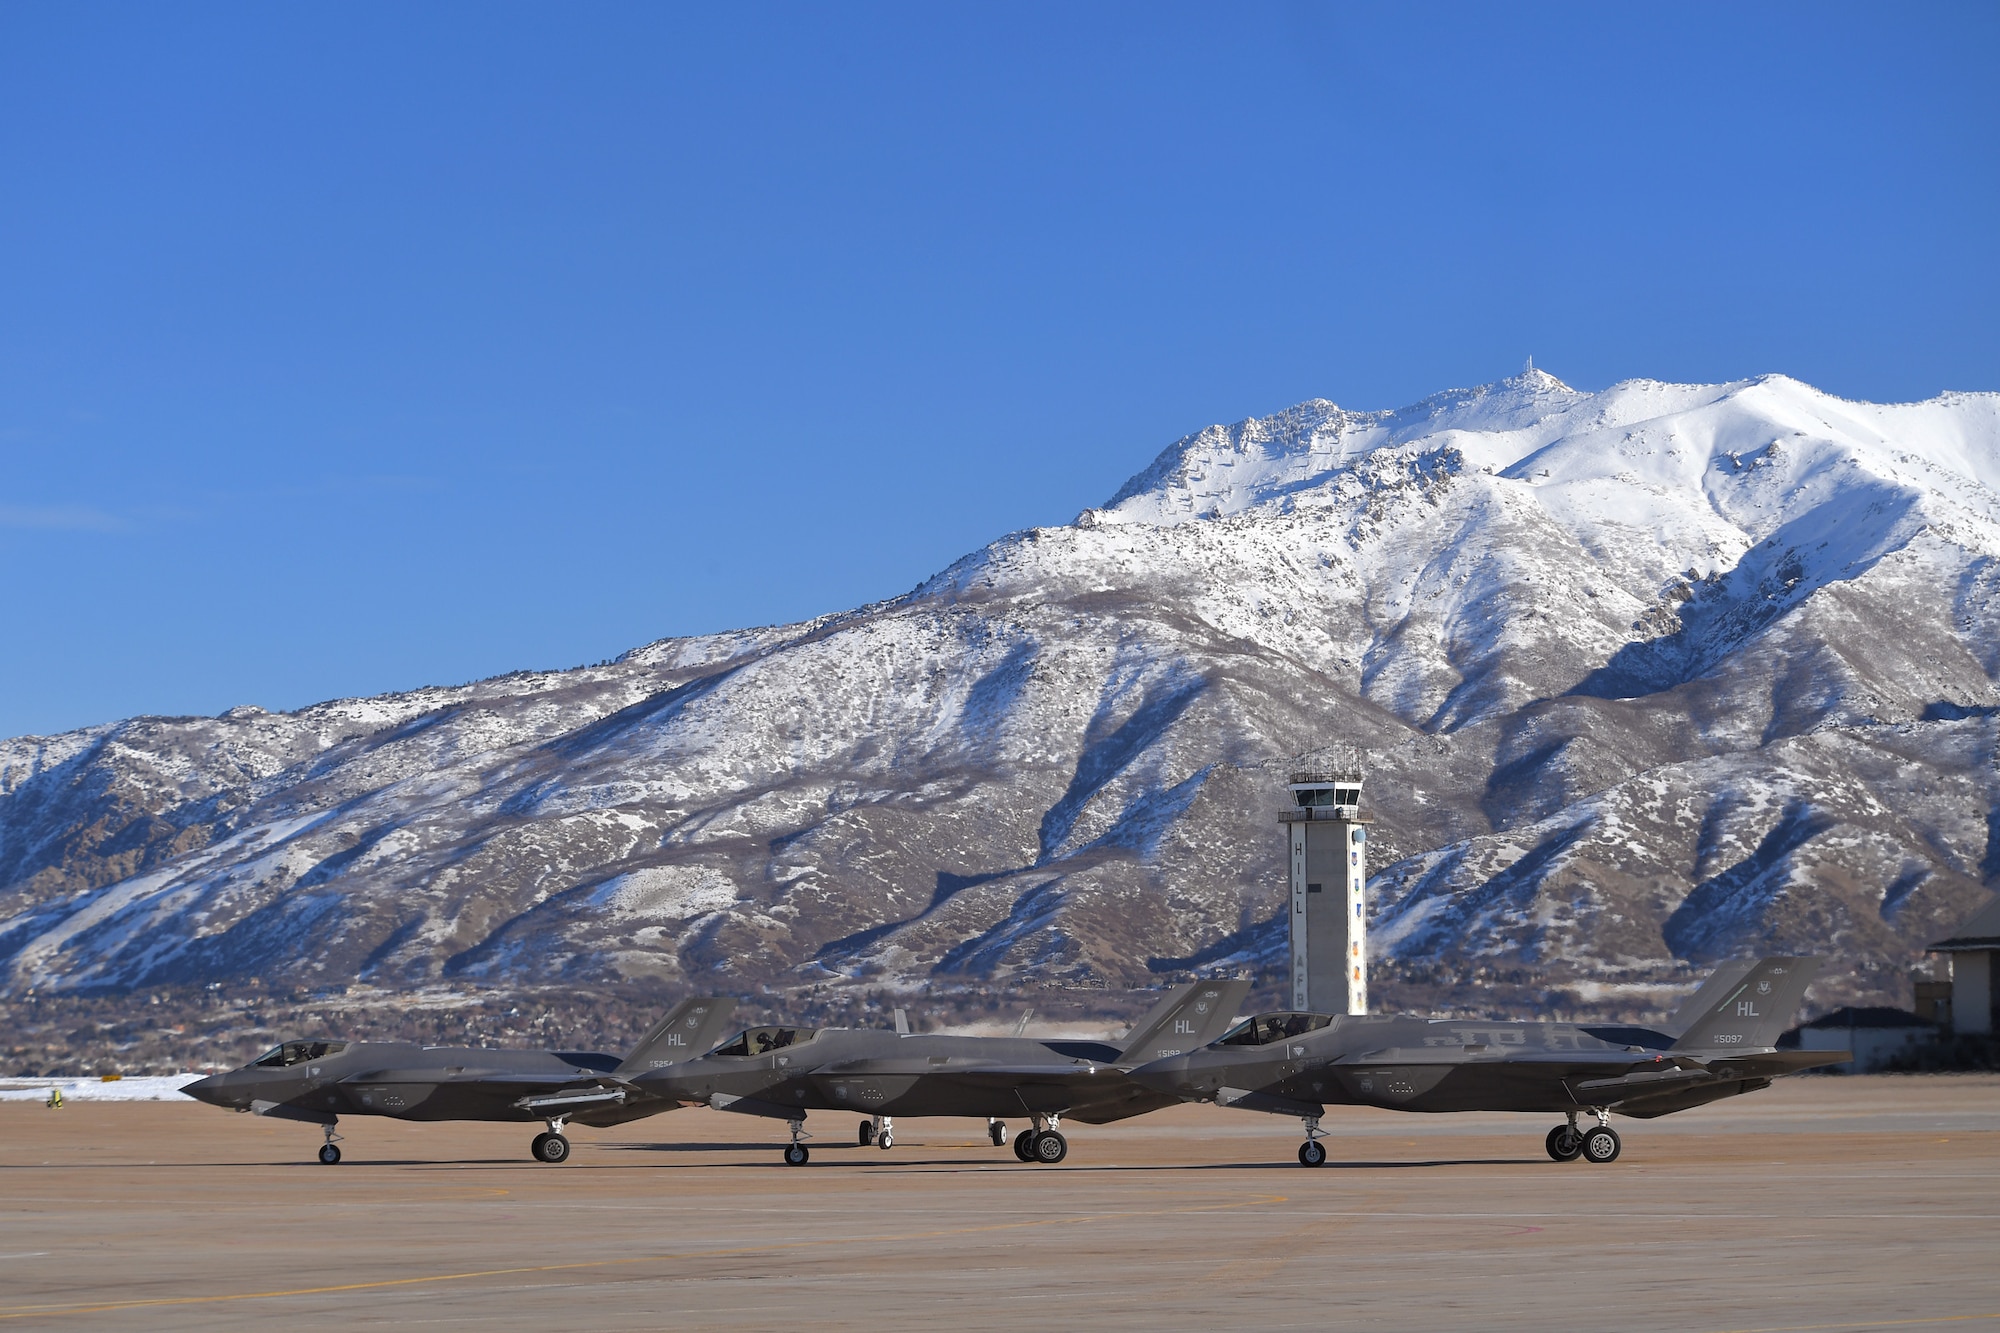 F-35 Lightning II fighter jets assigned to Hill Air Force Base, Utah, prepare to taxi during a combat power exercise